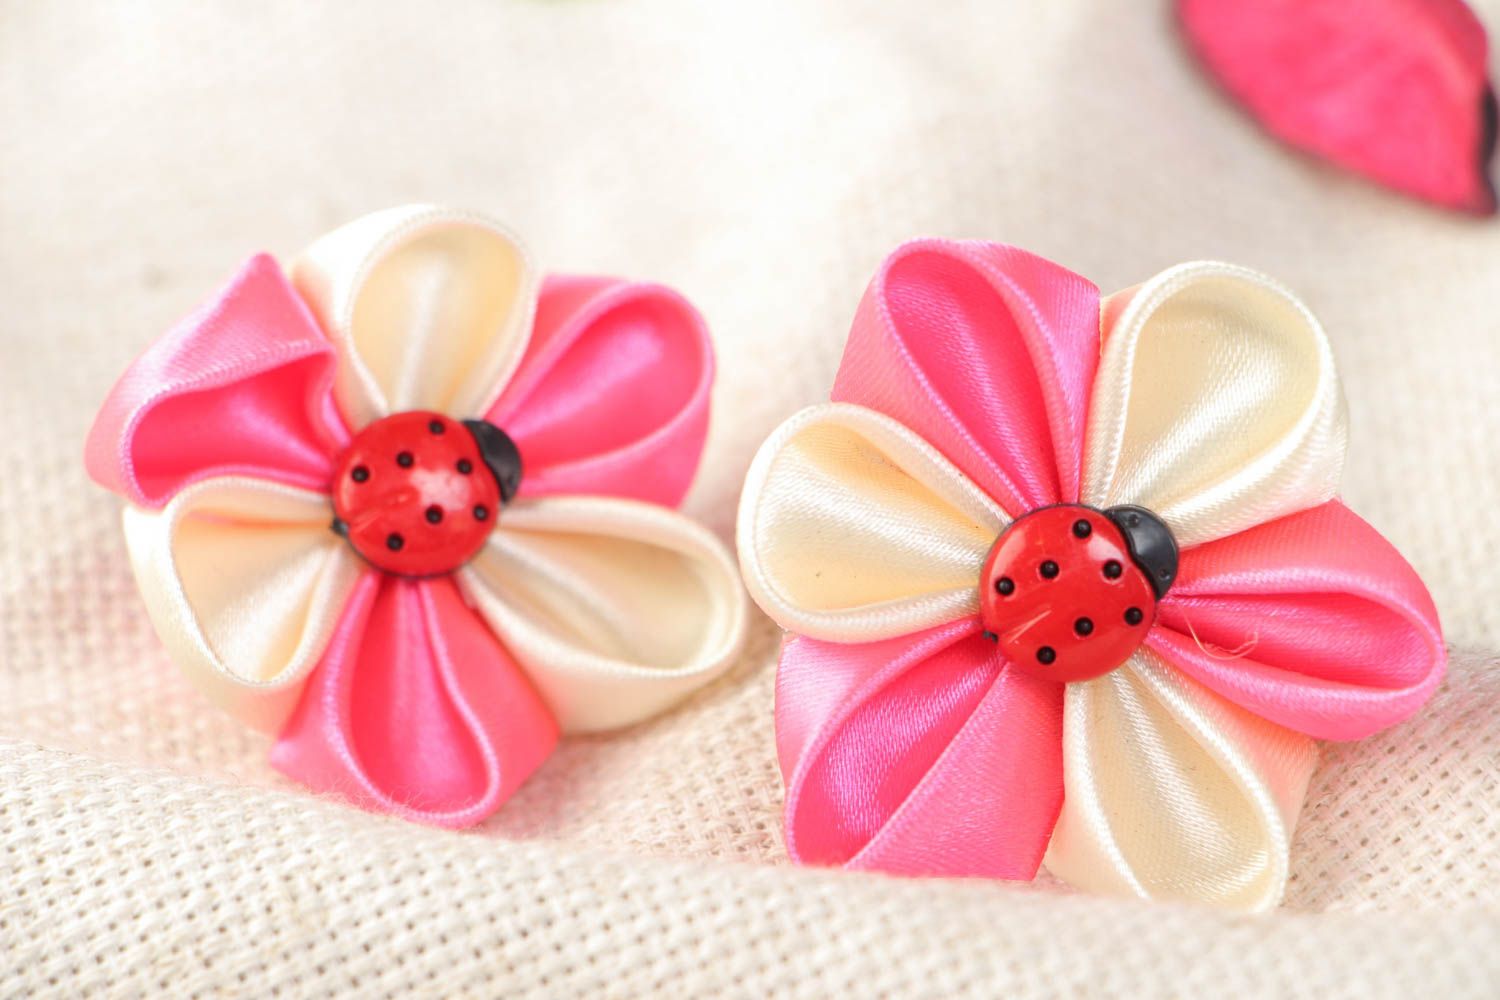 Handmade decorative hair ties with pink kanzashi flowers for kids set of 2 items photo 1